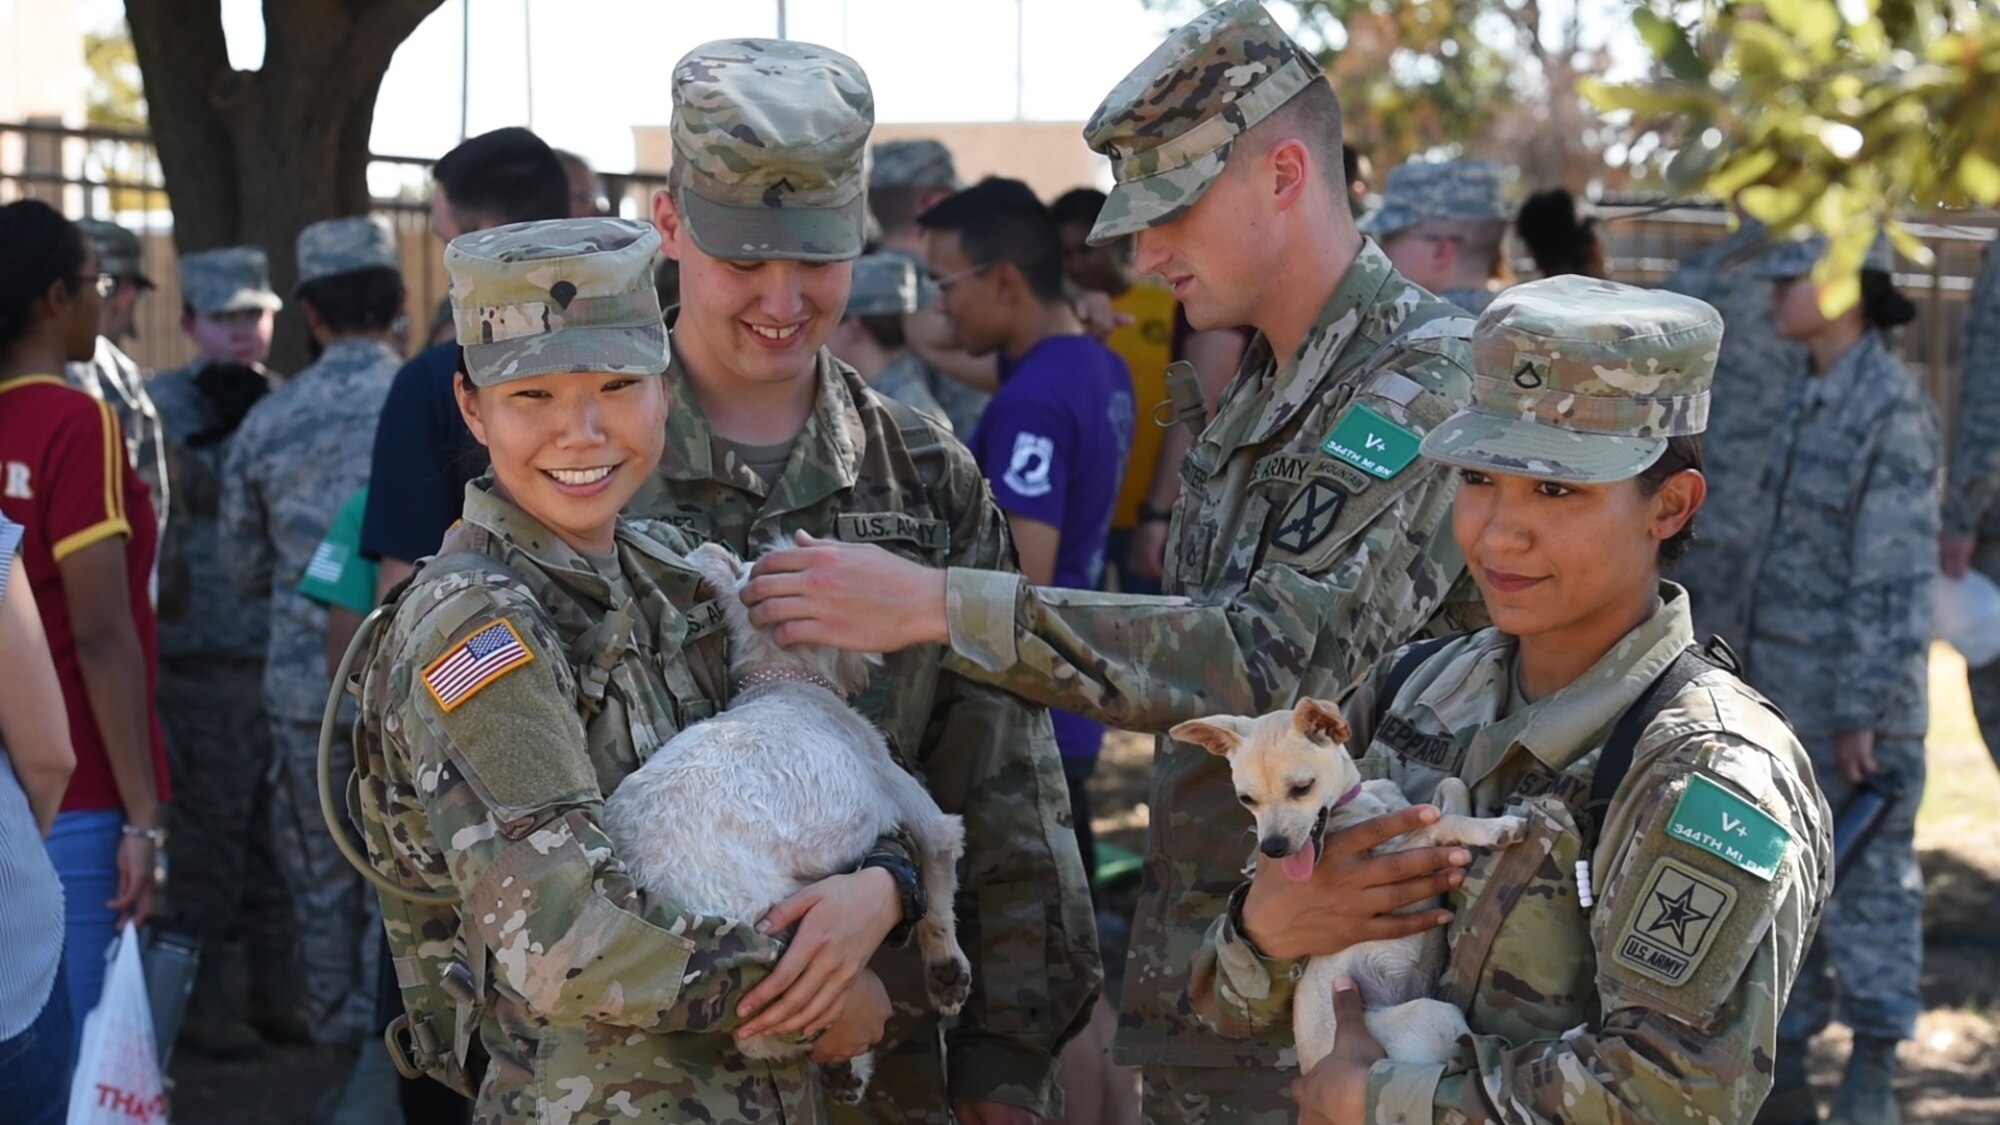 U.S. Army soldiers take time during their lunch to visit Cassie’s Place Canine-Assisted Relief and Emotional Support program, at Western Winds dining facility, Goodfellow Air Force Base, Texas, Sept. 26, 2019. Cassie’s Place C.A.R.E.S is a program focused on bringing dogs and service members together in the hopes of unwinding, de-stressing and giving individuals the chance to connect with someone, or something. (U.S. Air Force photo by Senior Airman Zachary Chapman)